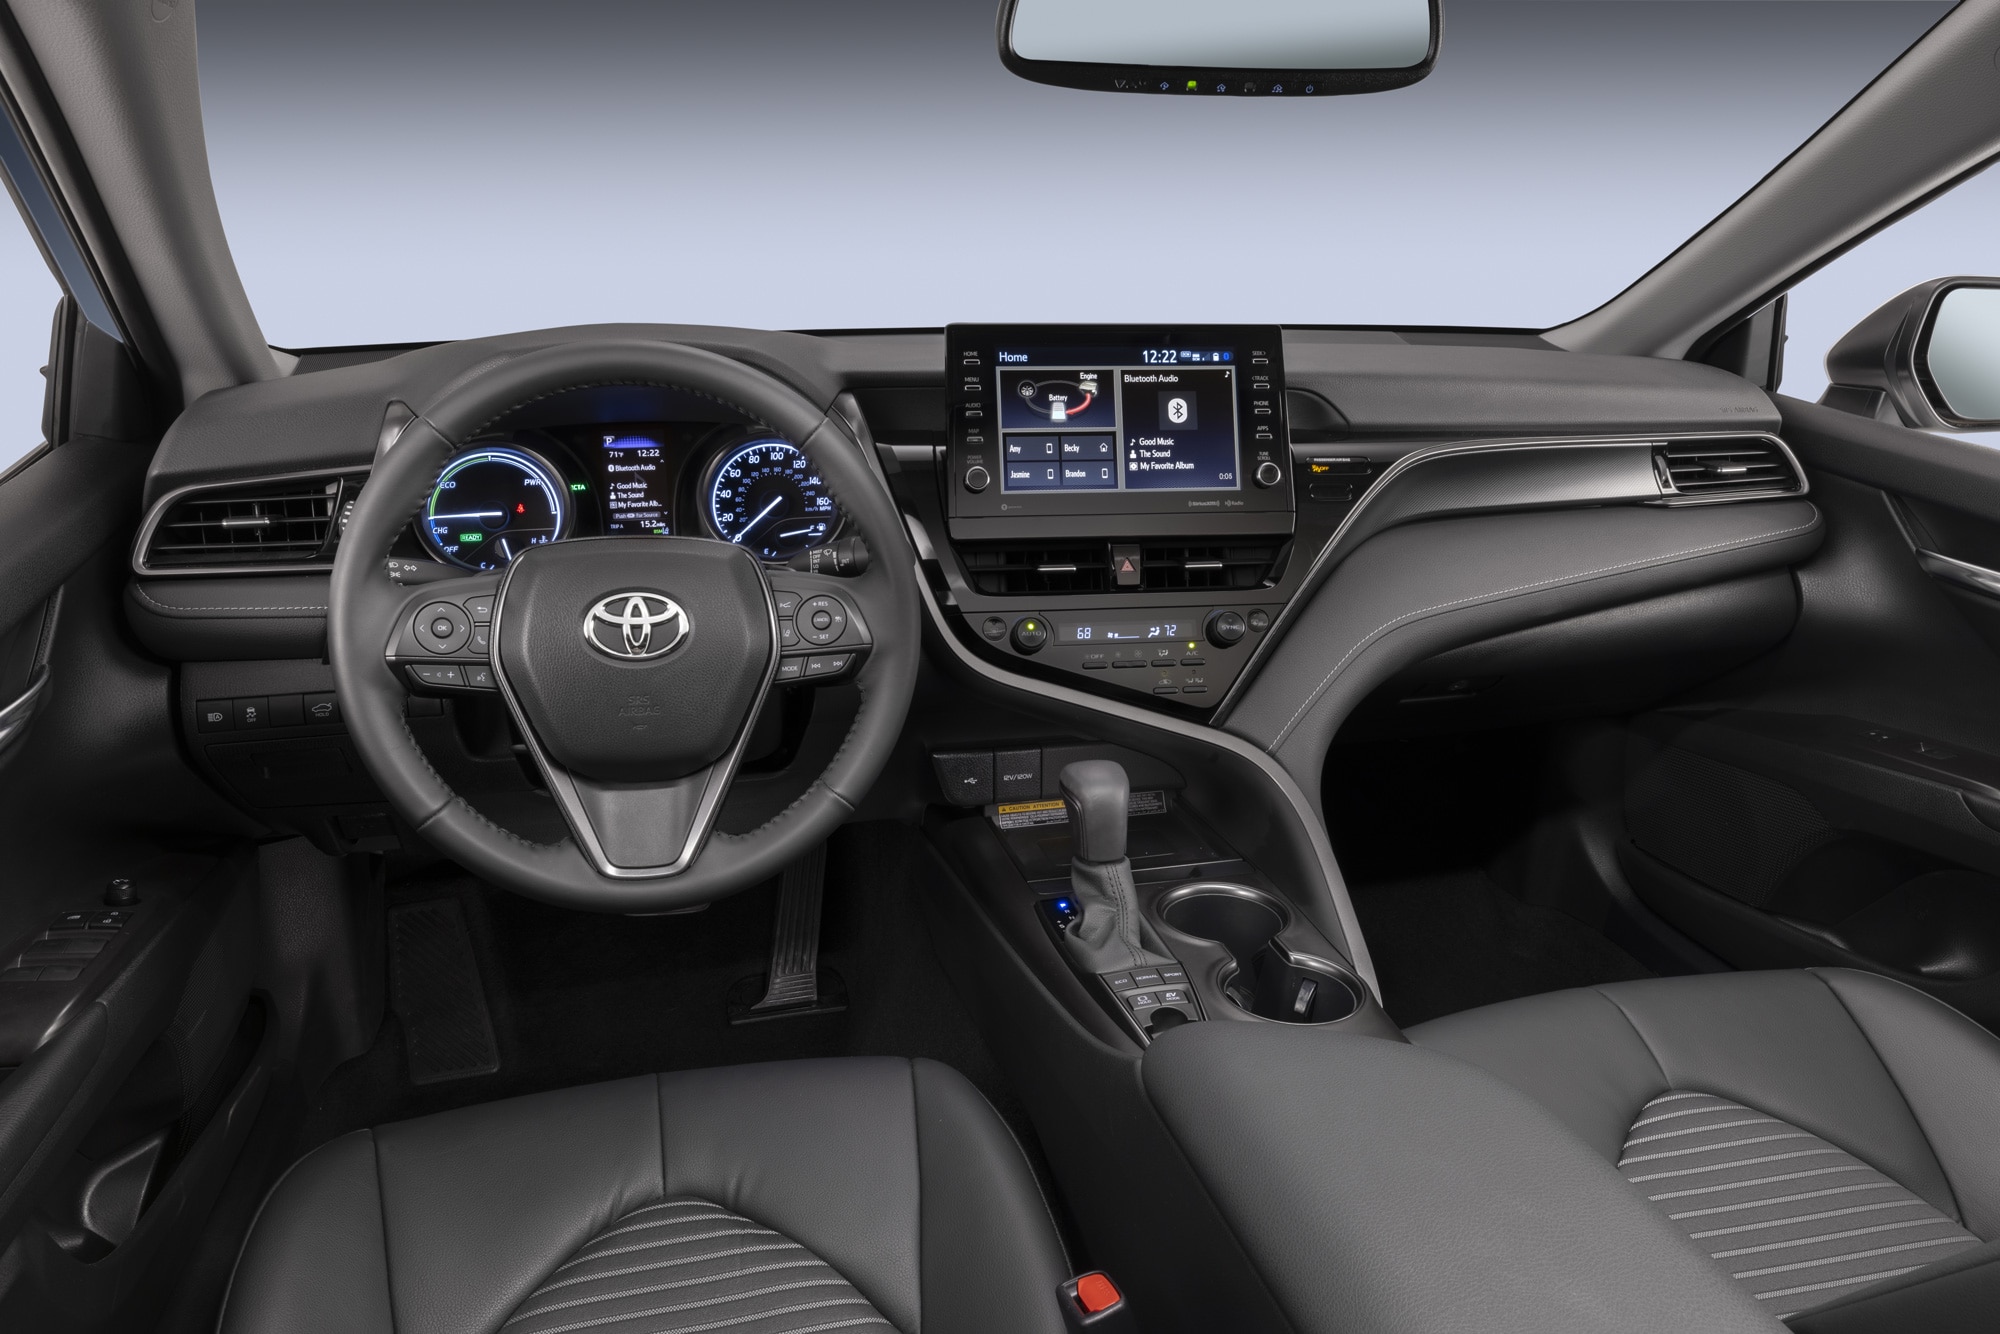 2023 Toyota Camry interior and dashboard